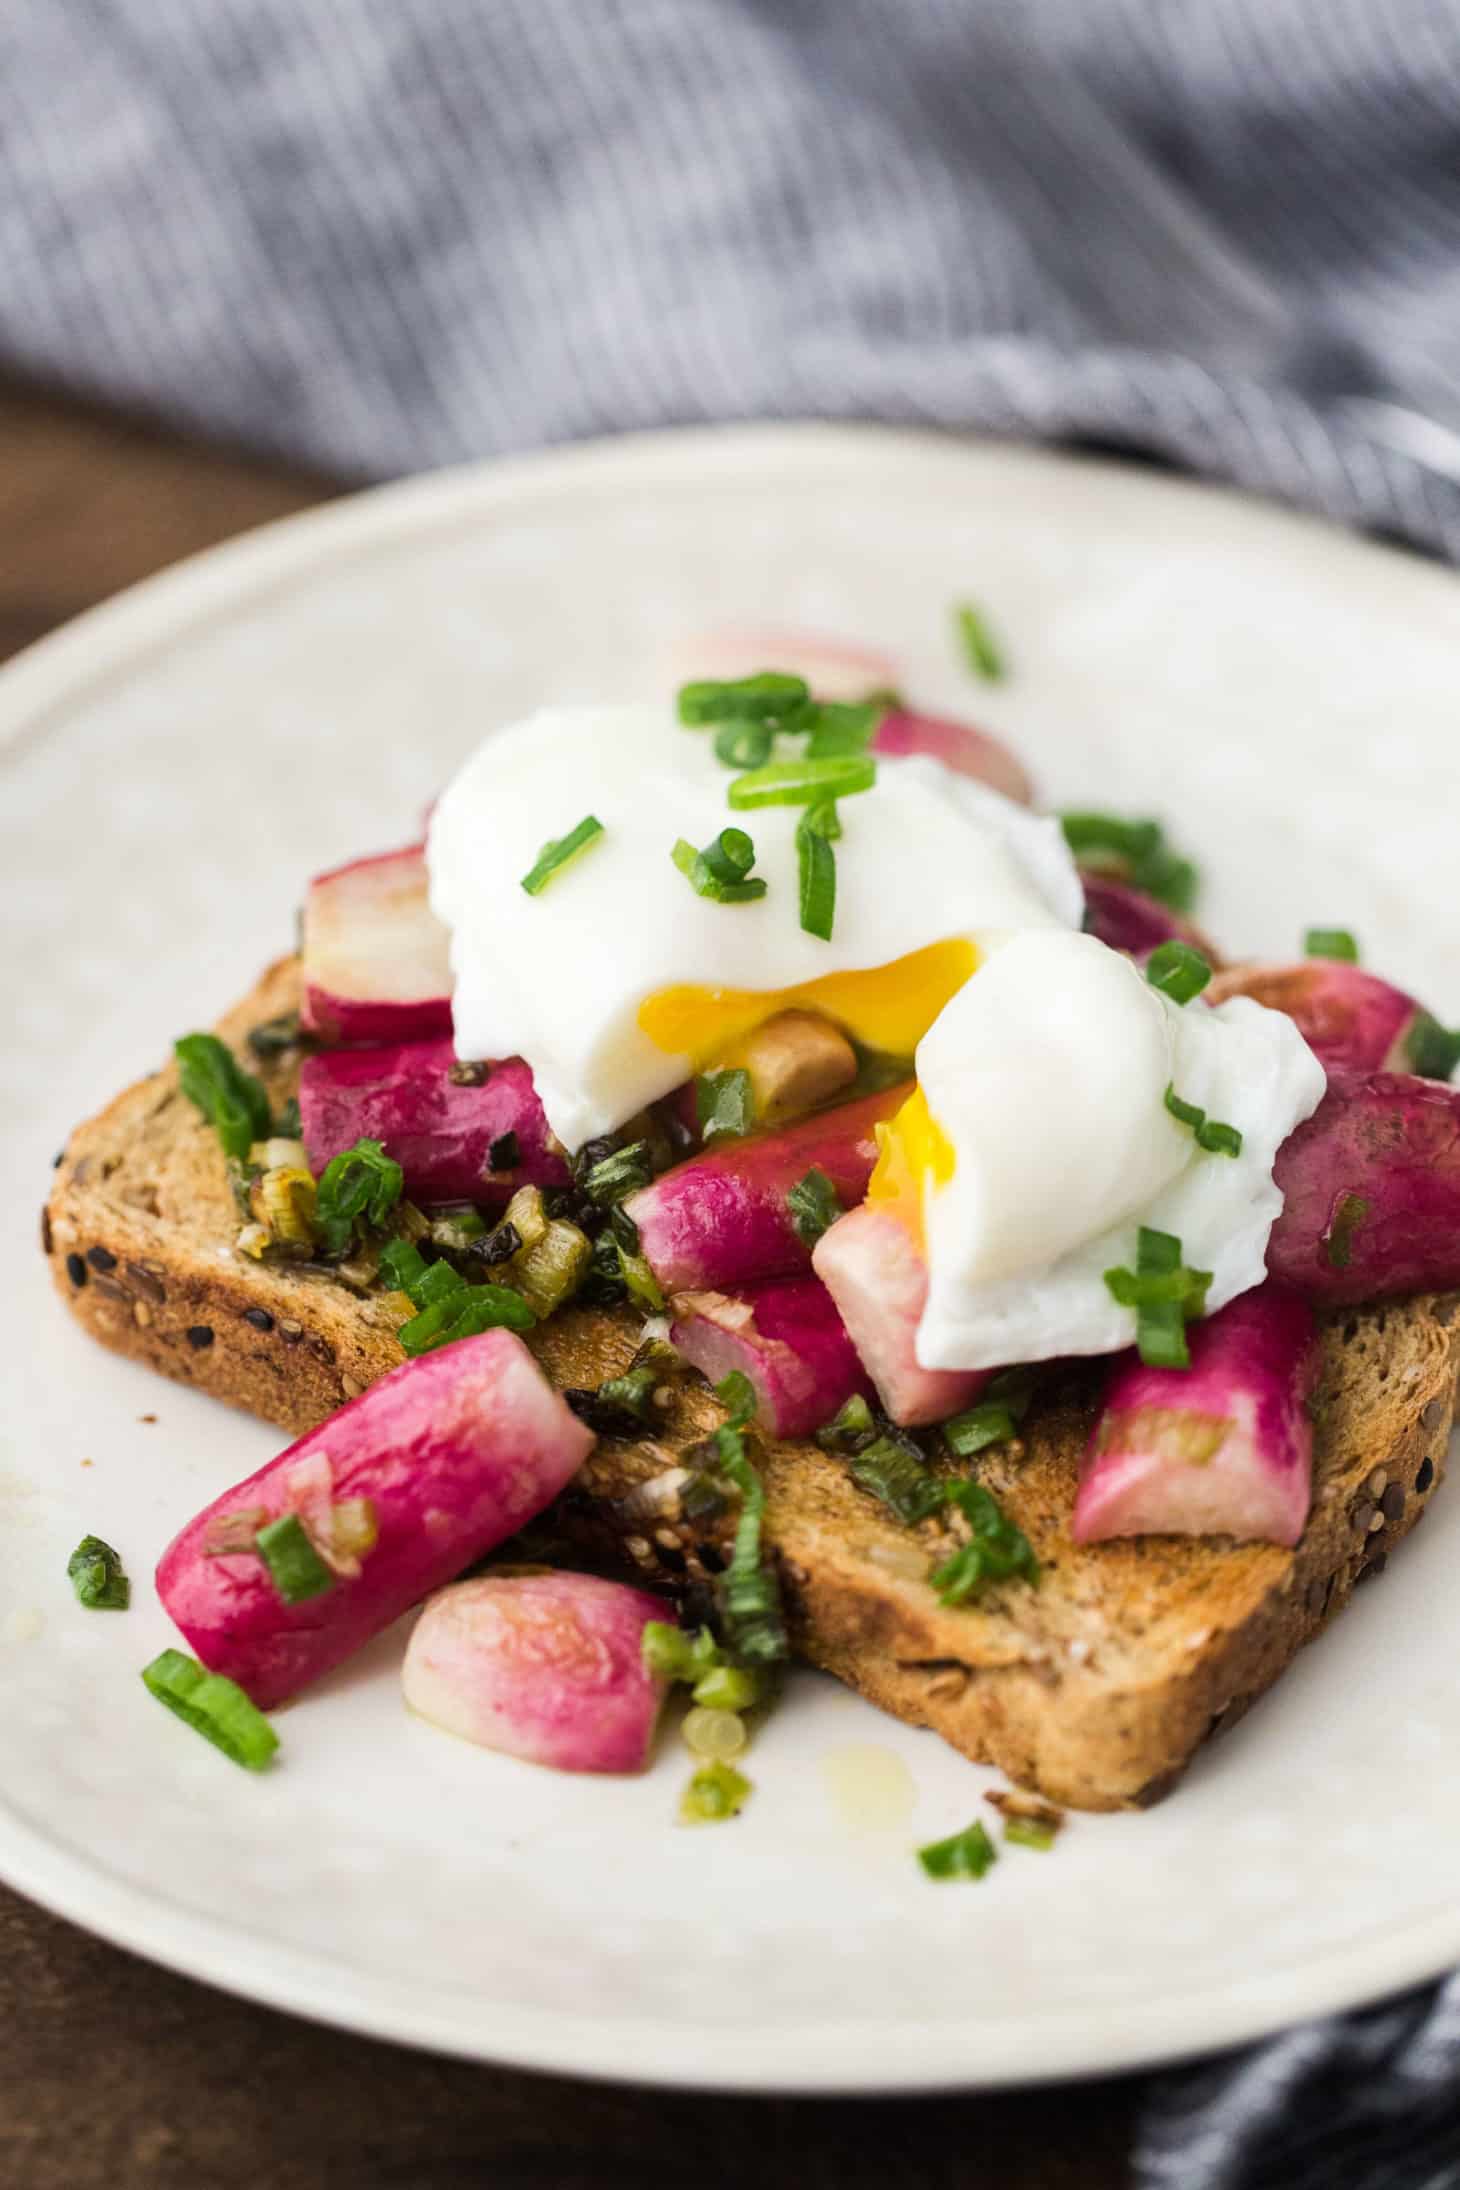 Buttered Radishes and Spring Onions with a Poached Egg